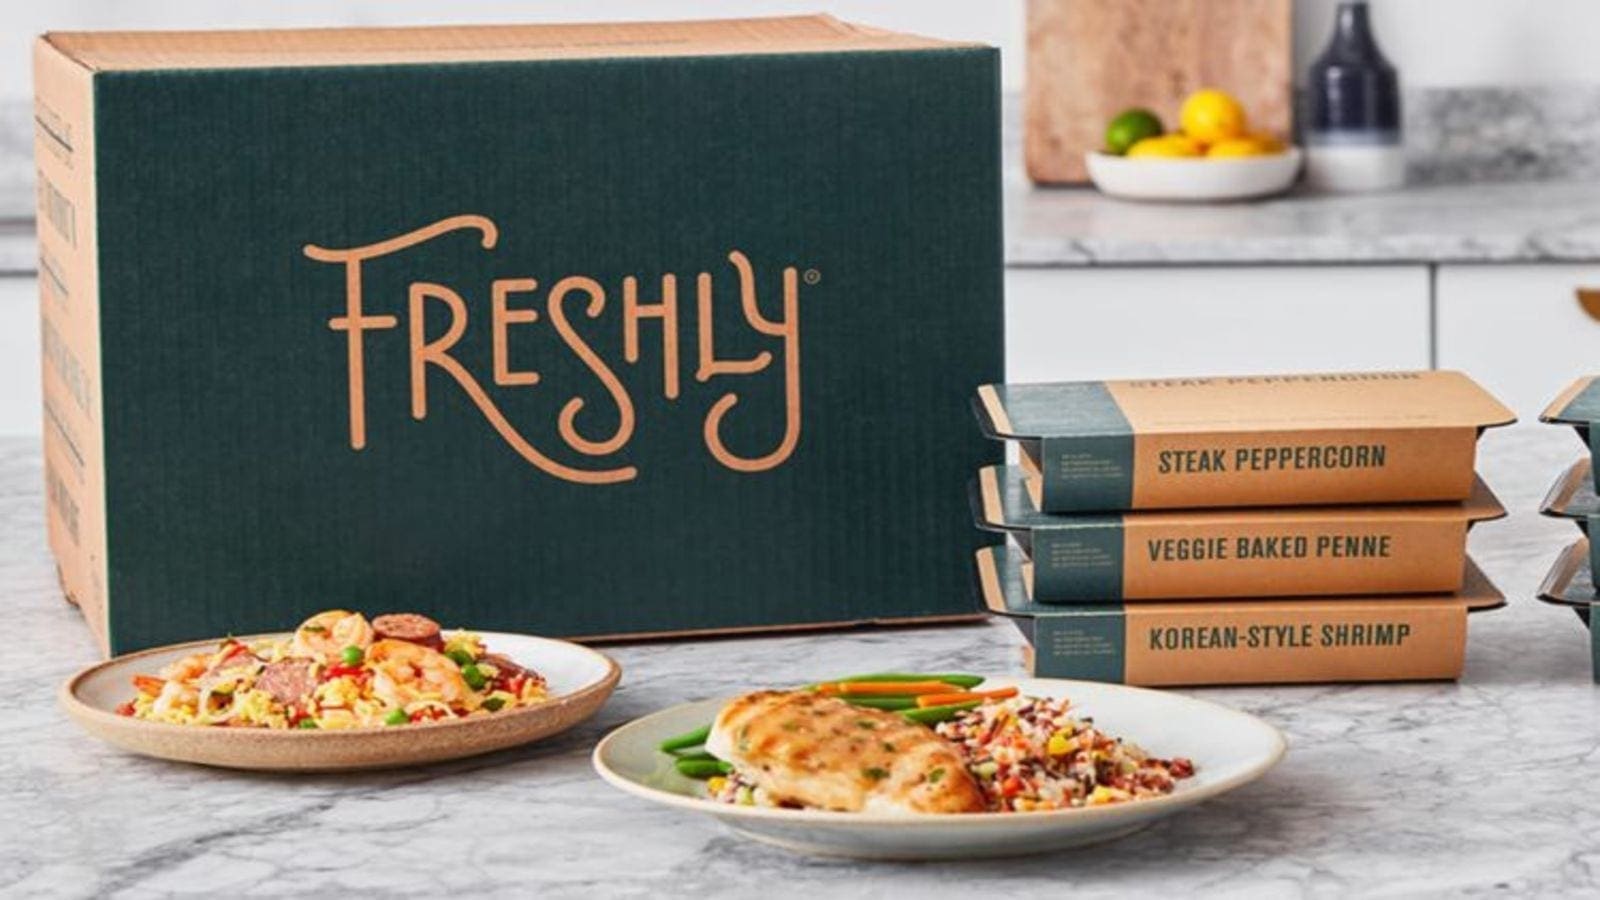 Nestlé meal delivery service unit Freshly to open new distribution center in US to meet rising demand